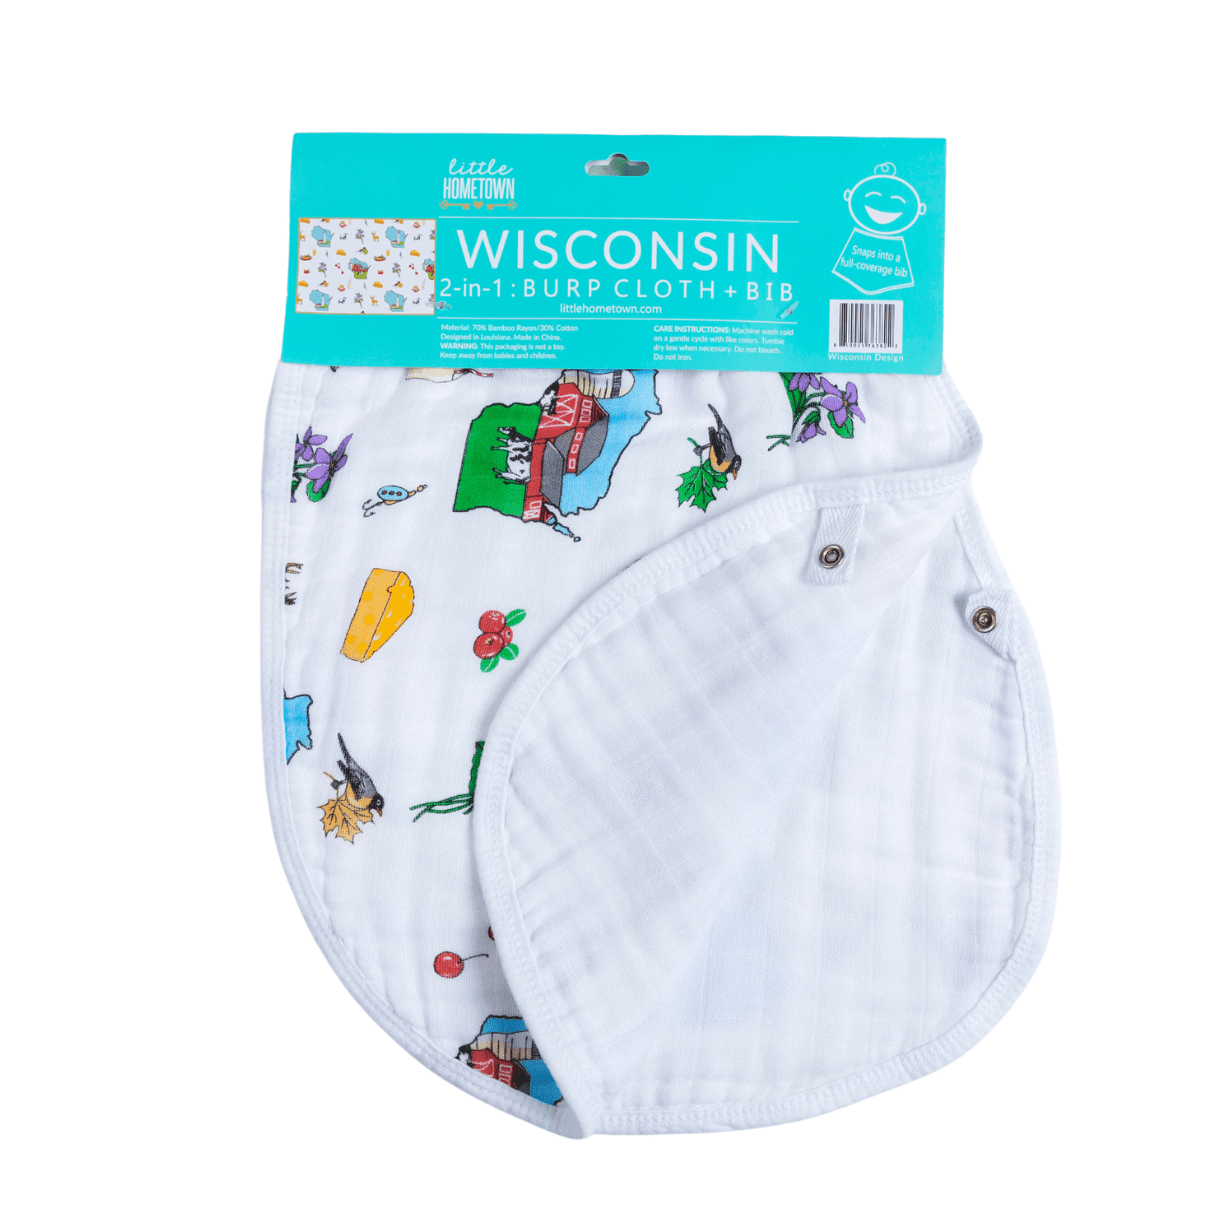 Wisconsin baby burp cloth and bib combo showing the back and how it snaps from a burp cloth to a bib.